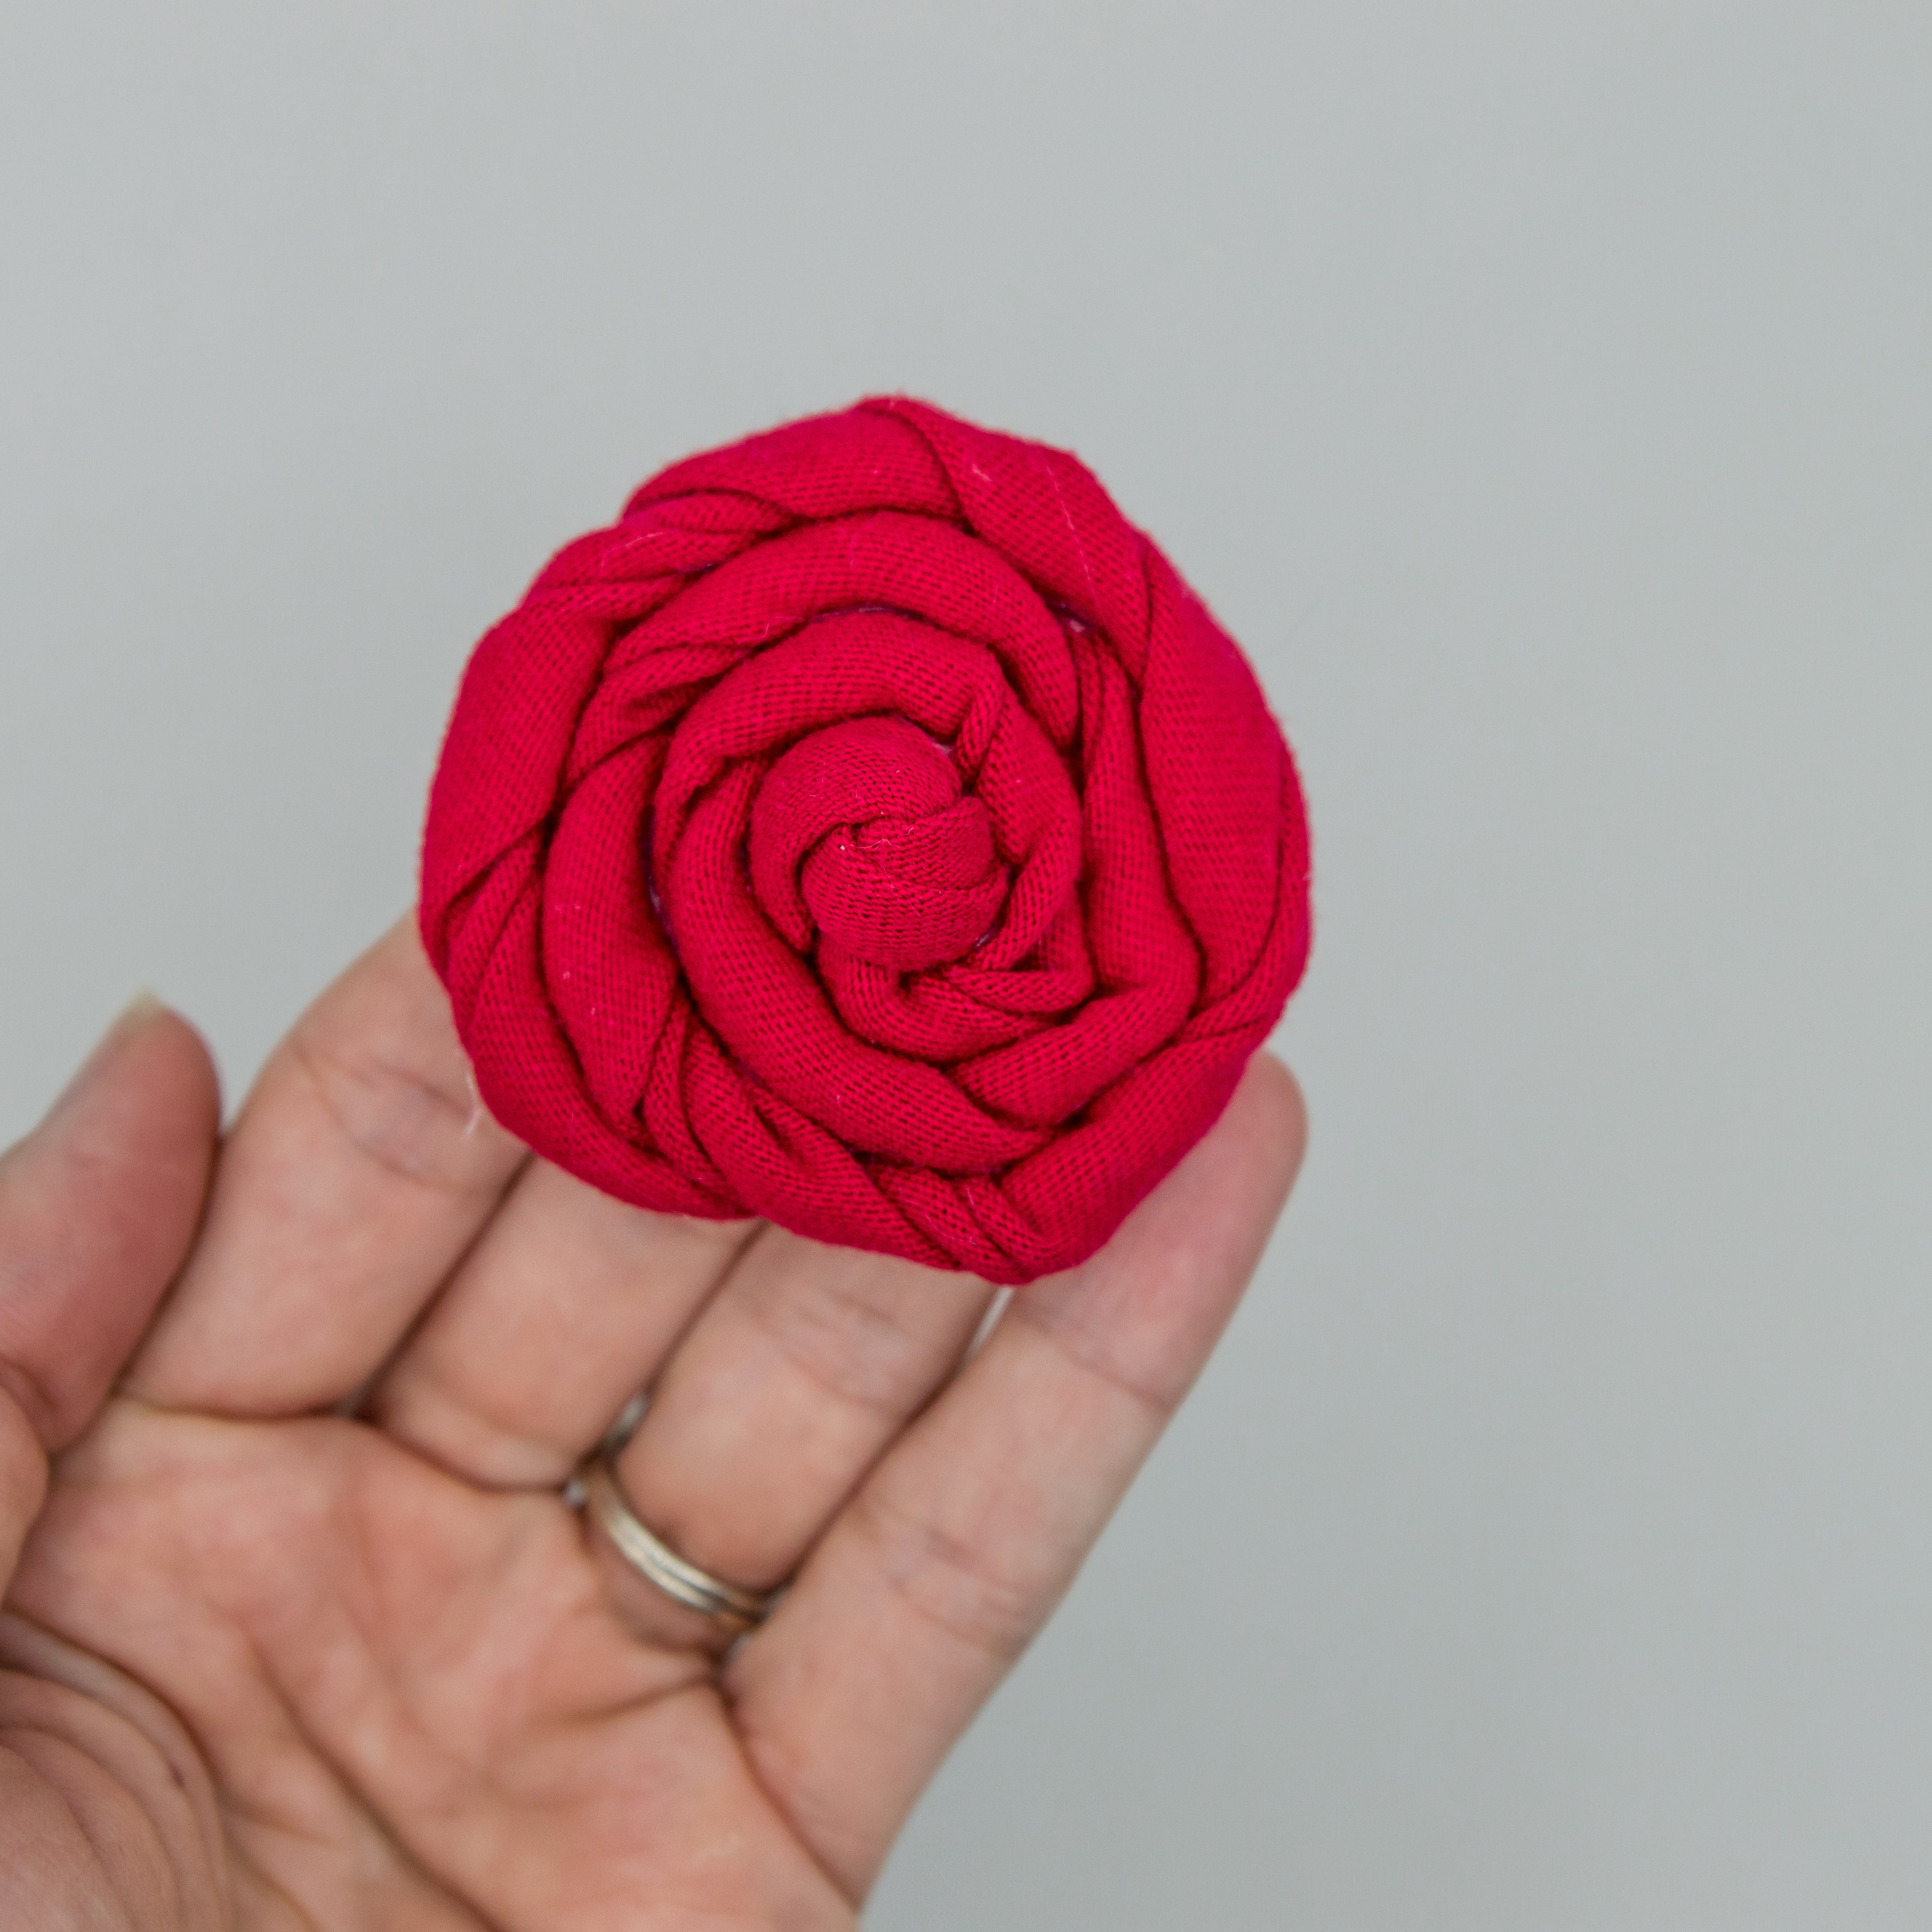 2 inch red cotton rose - ATD kind